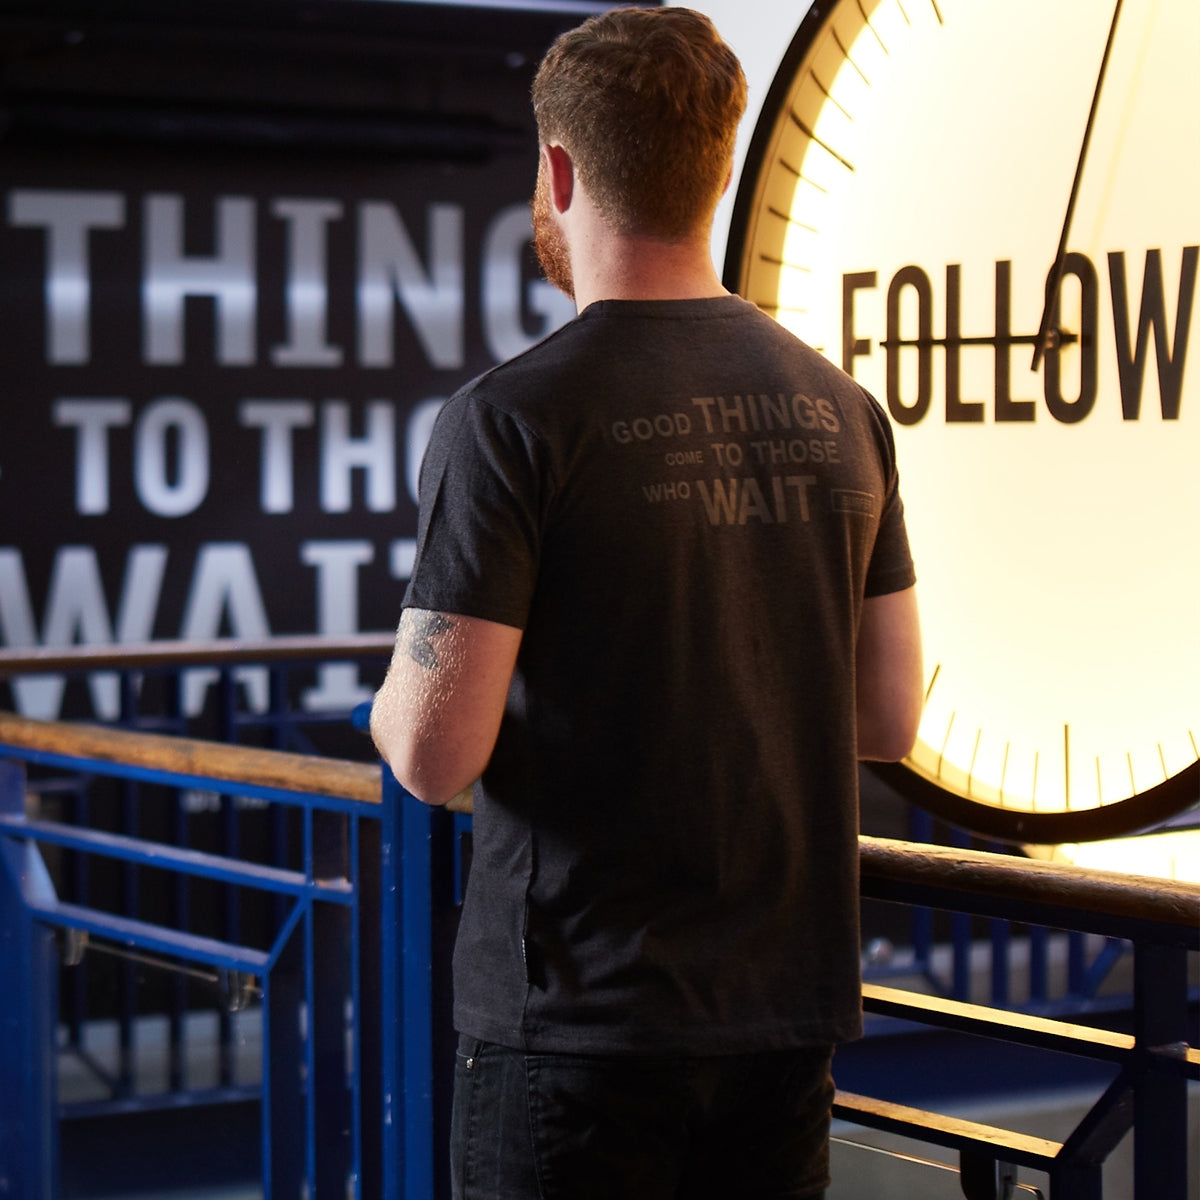 A man wearing a Guinness Surf Tee, a black t-shirt made with durable cotton blend fabric, looking at a clock.